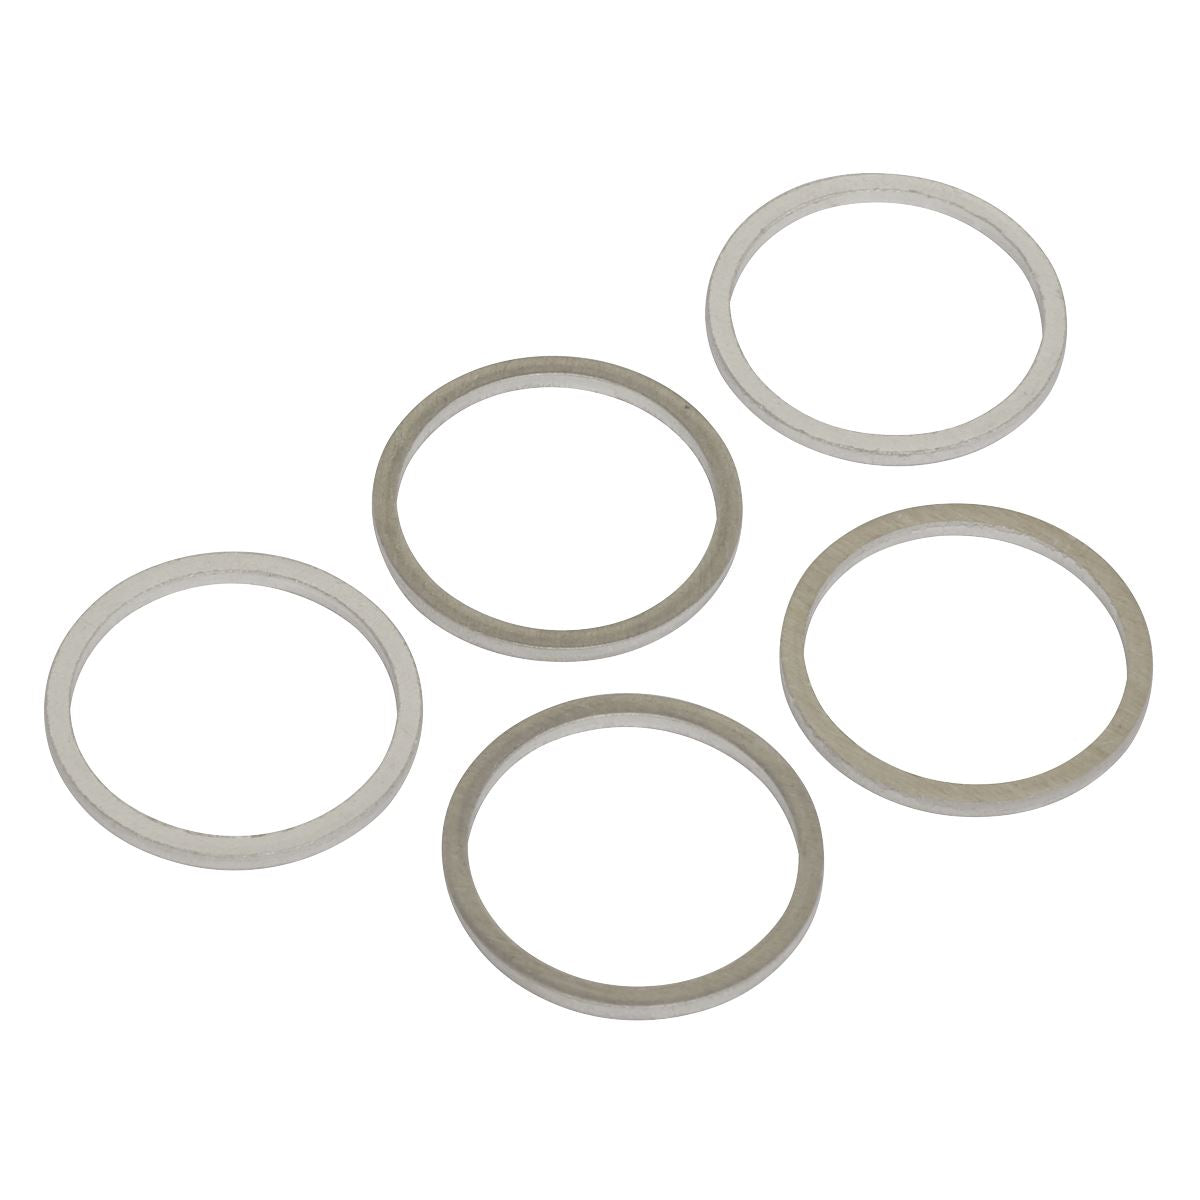 Sealey Sump Plug Washer M20 - Pack of 5